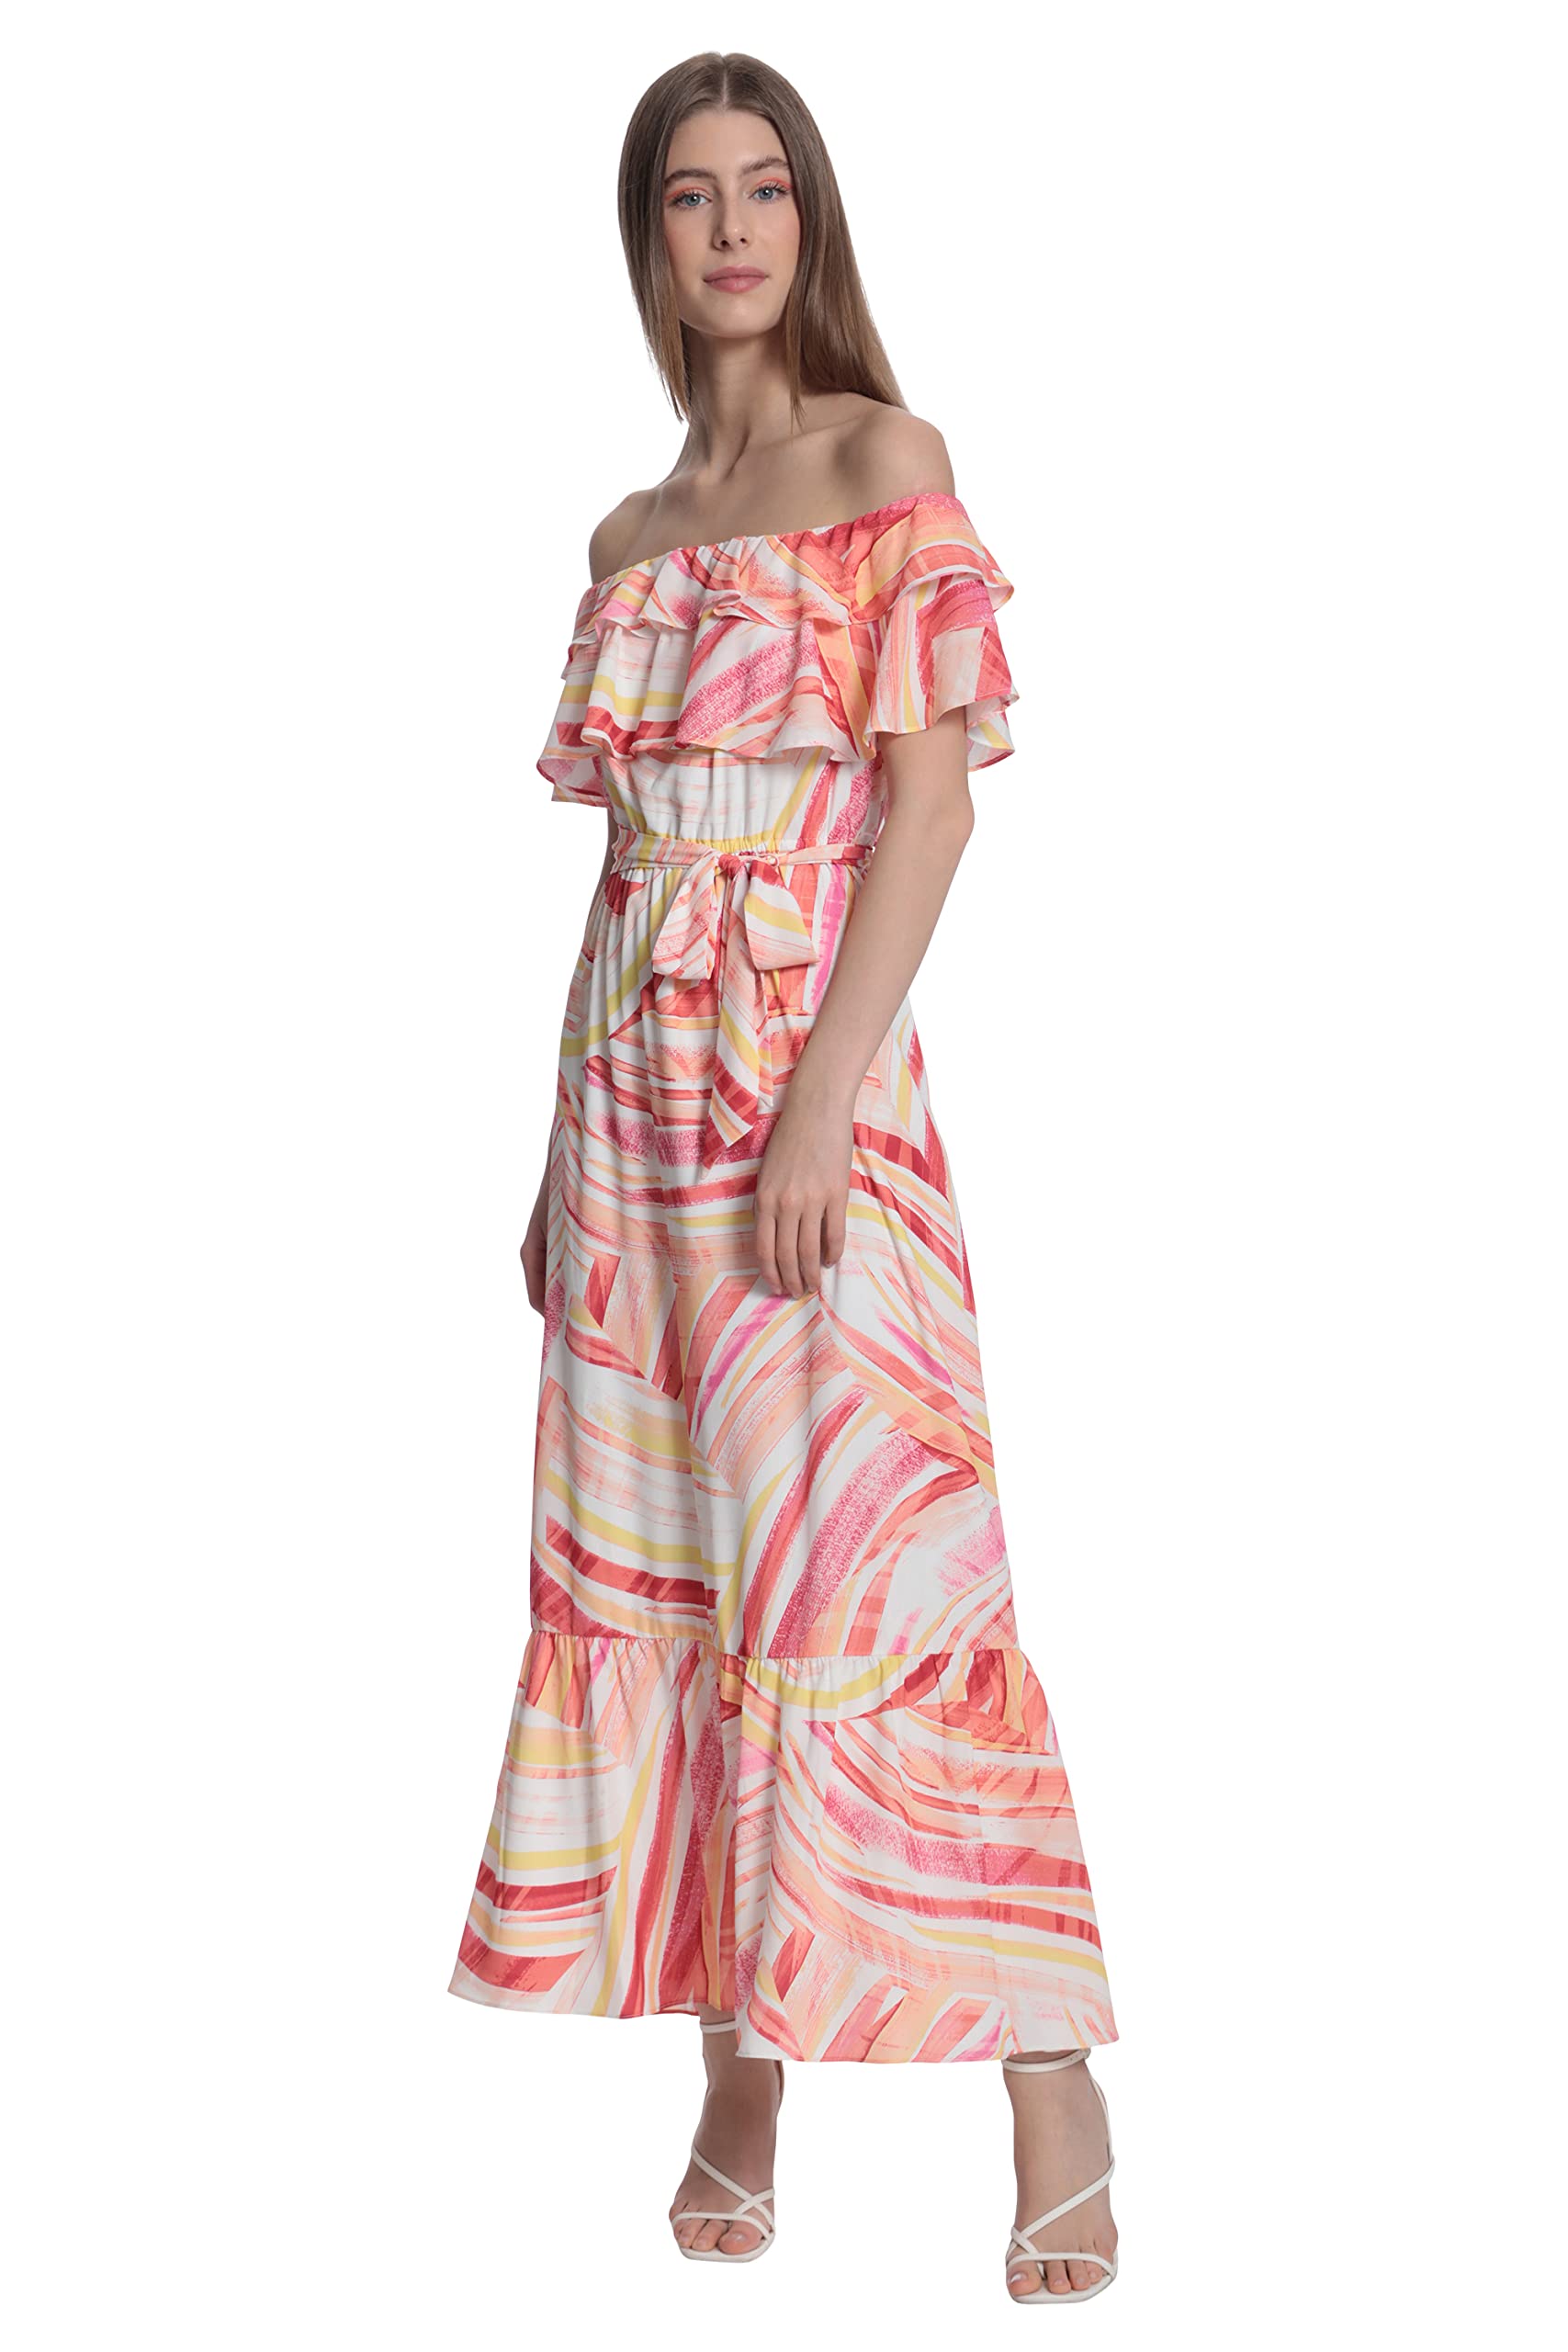 Donna Morgan Women's Painterly Stripe Printed Maxi Dress with Off The Shoulder Ruffle and Bottom Skirt Tier